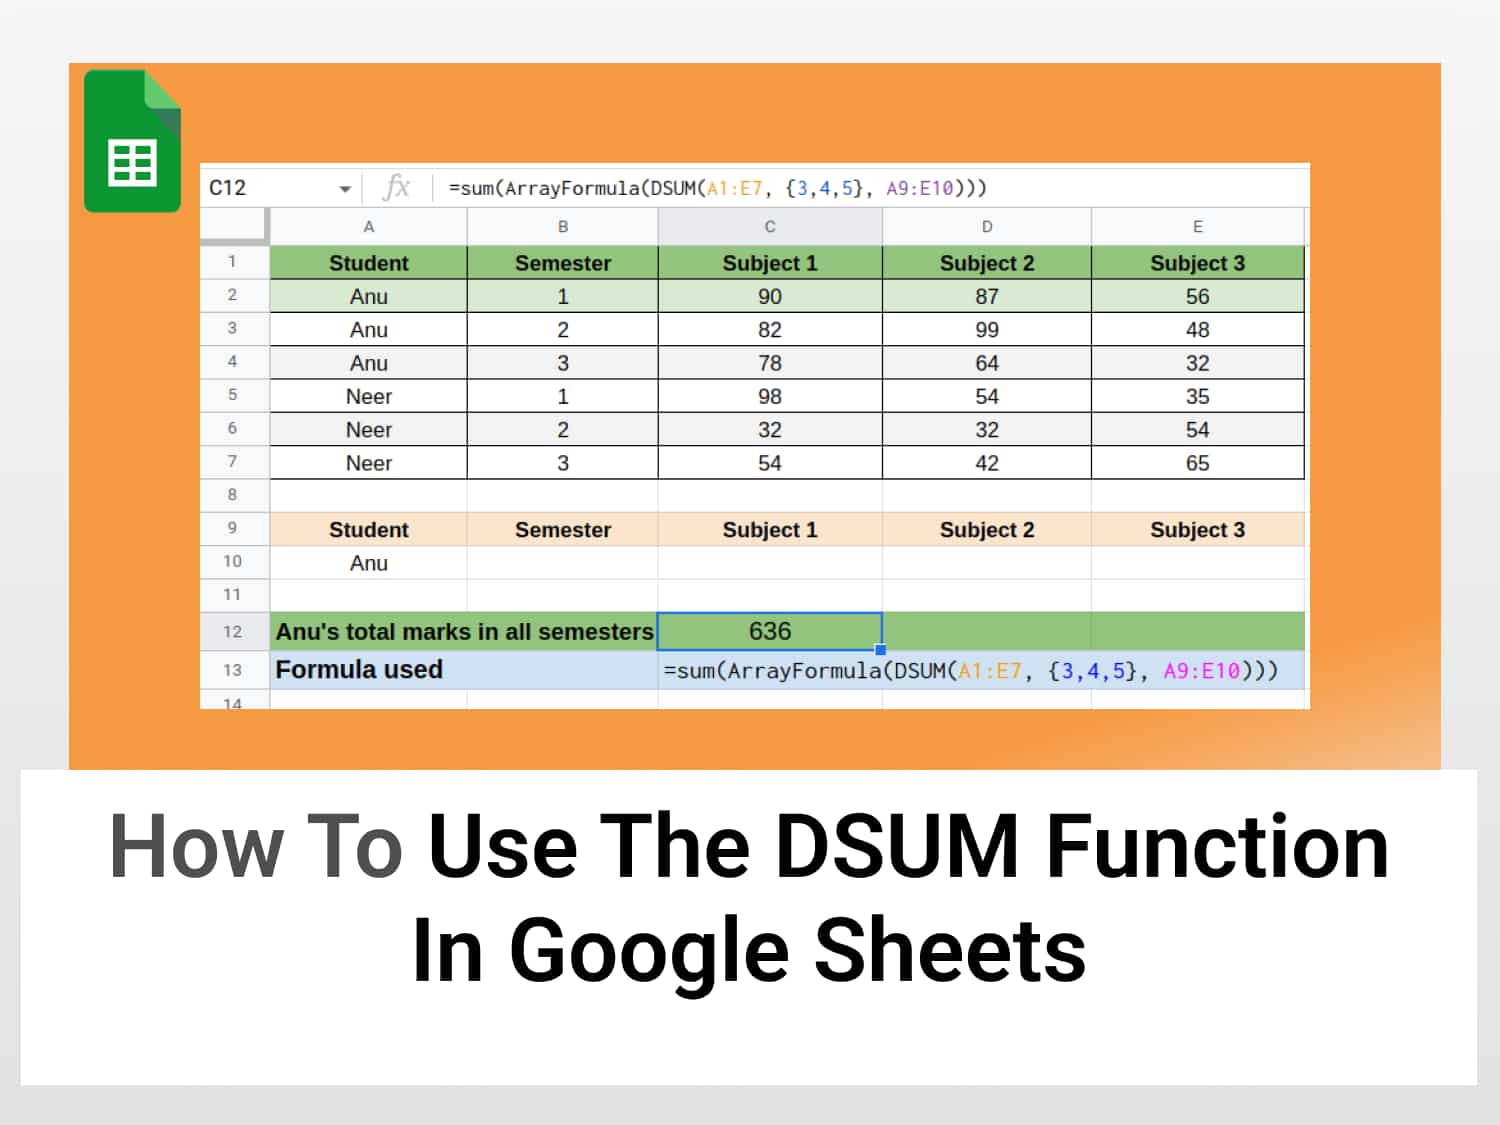 How to use the DSUM function in Google Sheets